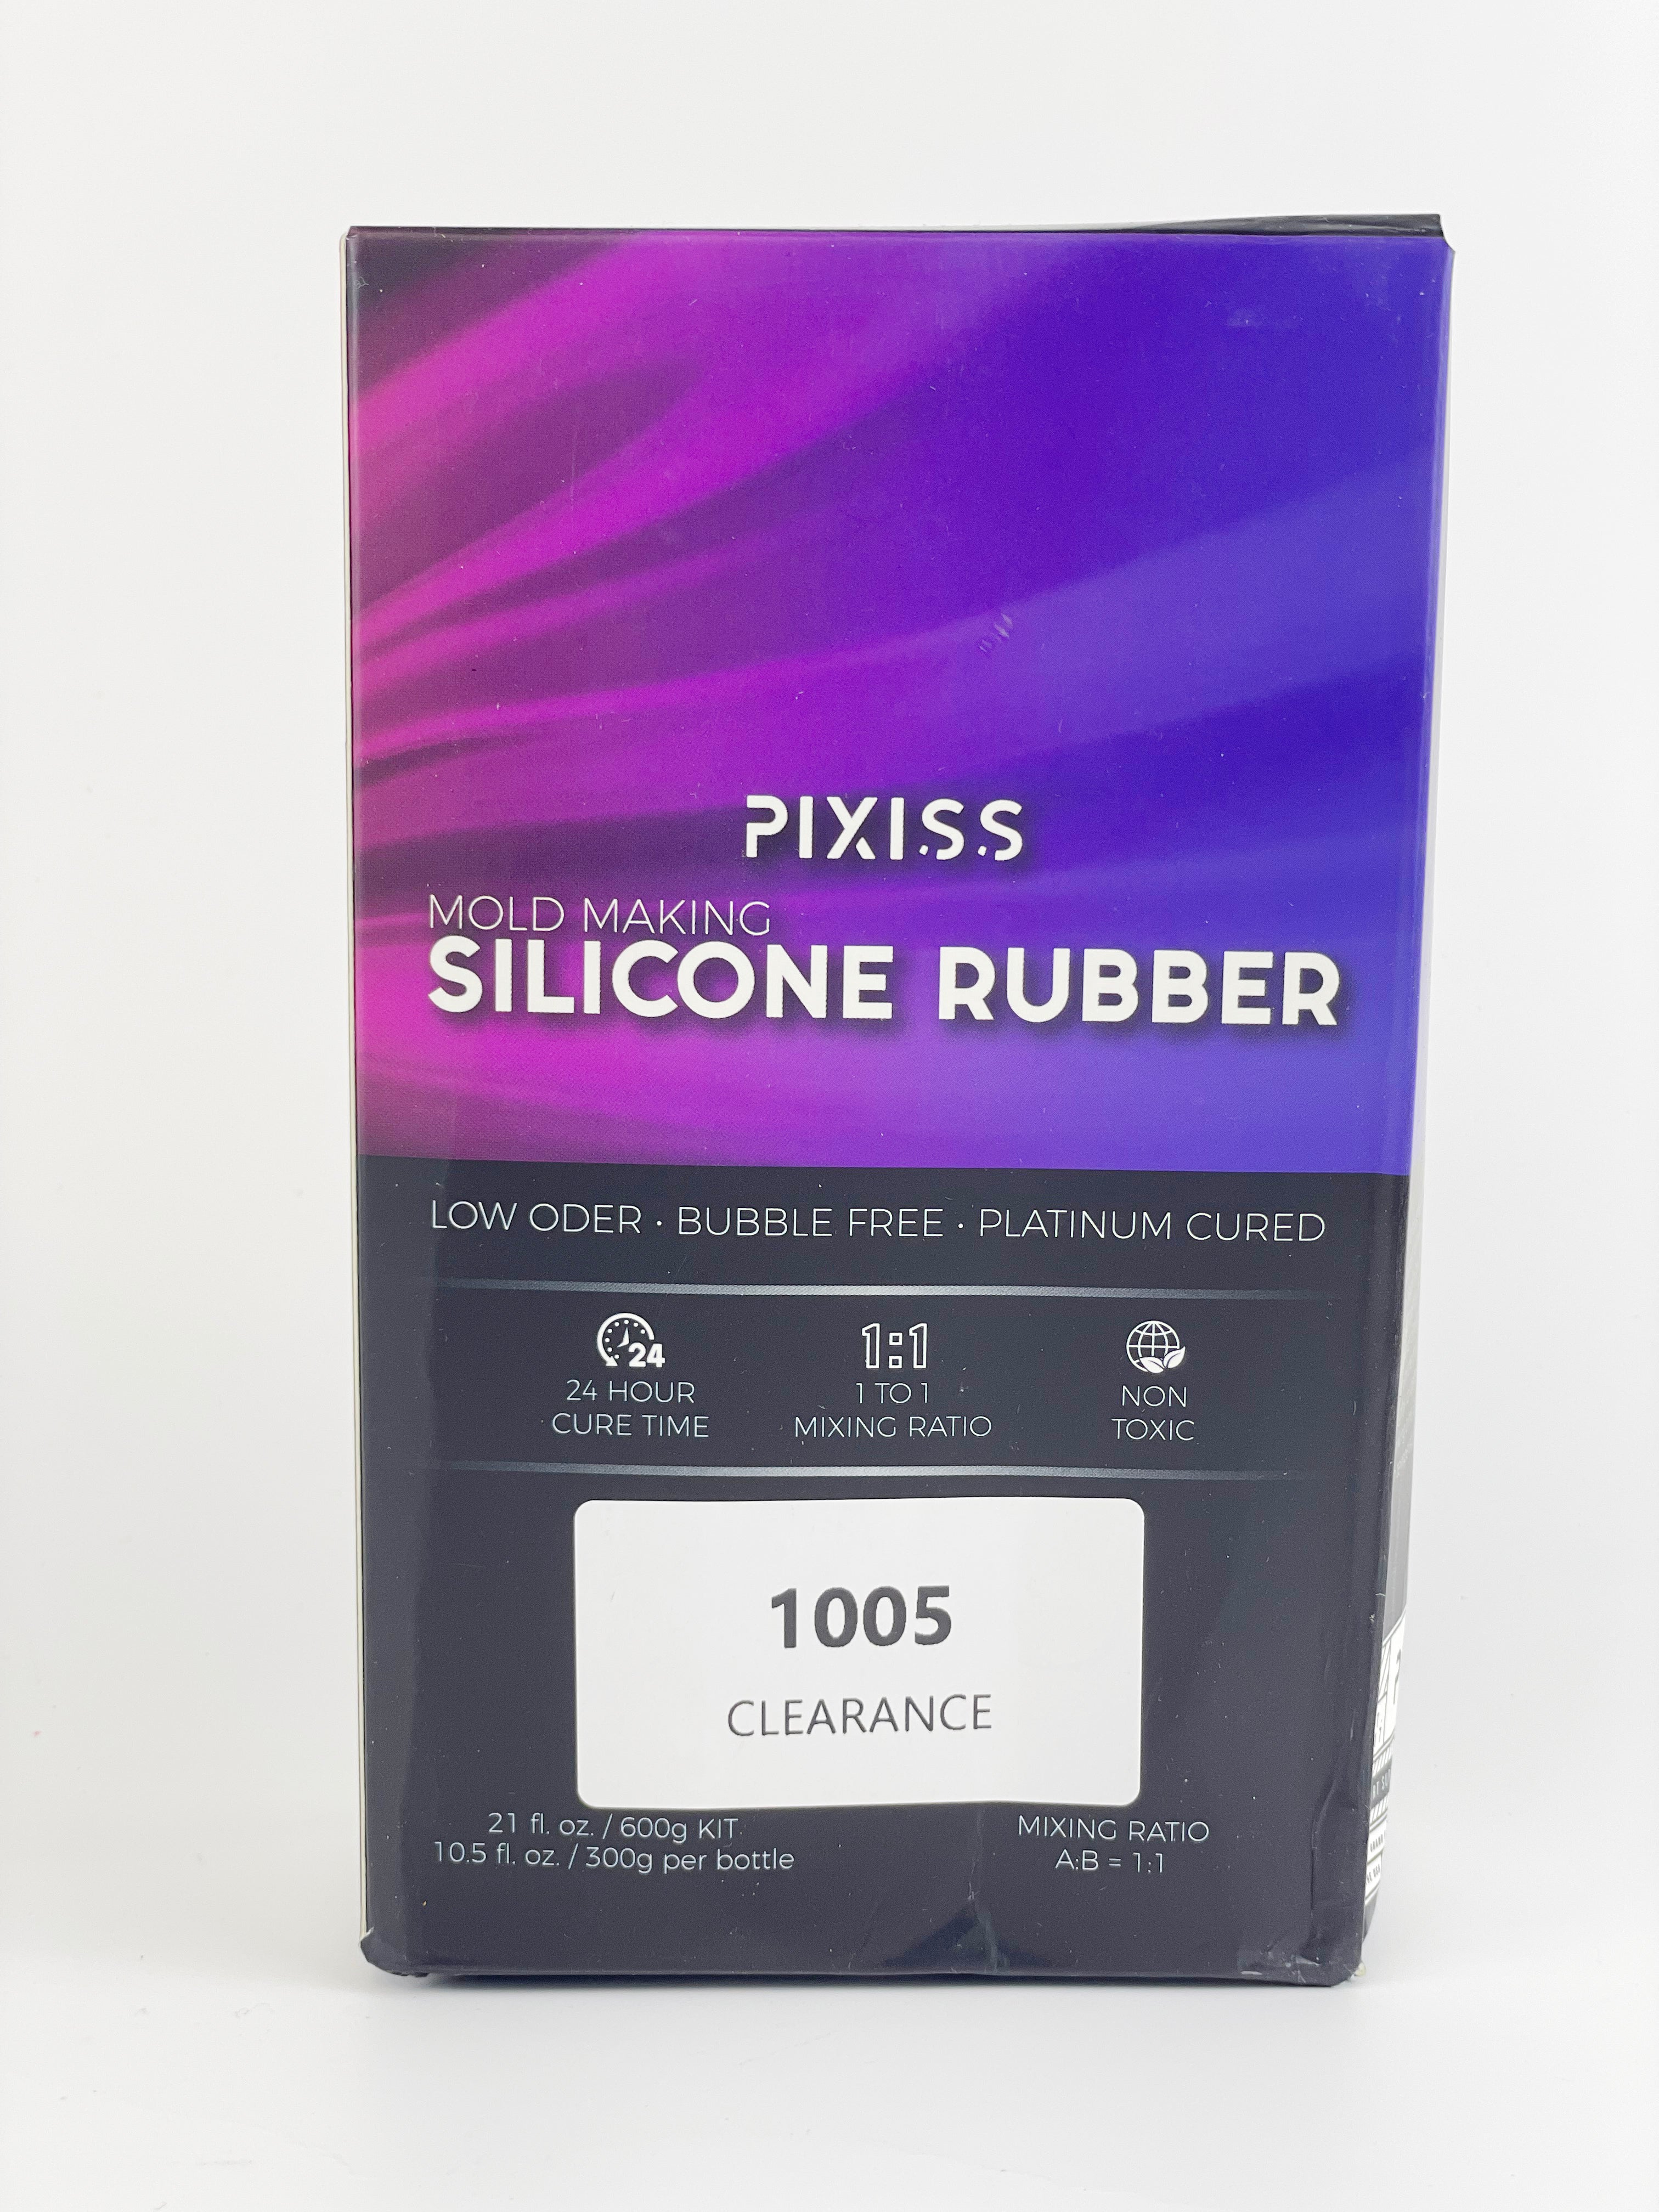 Pixiss Liquid Silicone Rubber for Mold Making - 21.16 oz. Kit